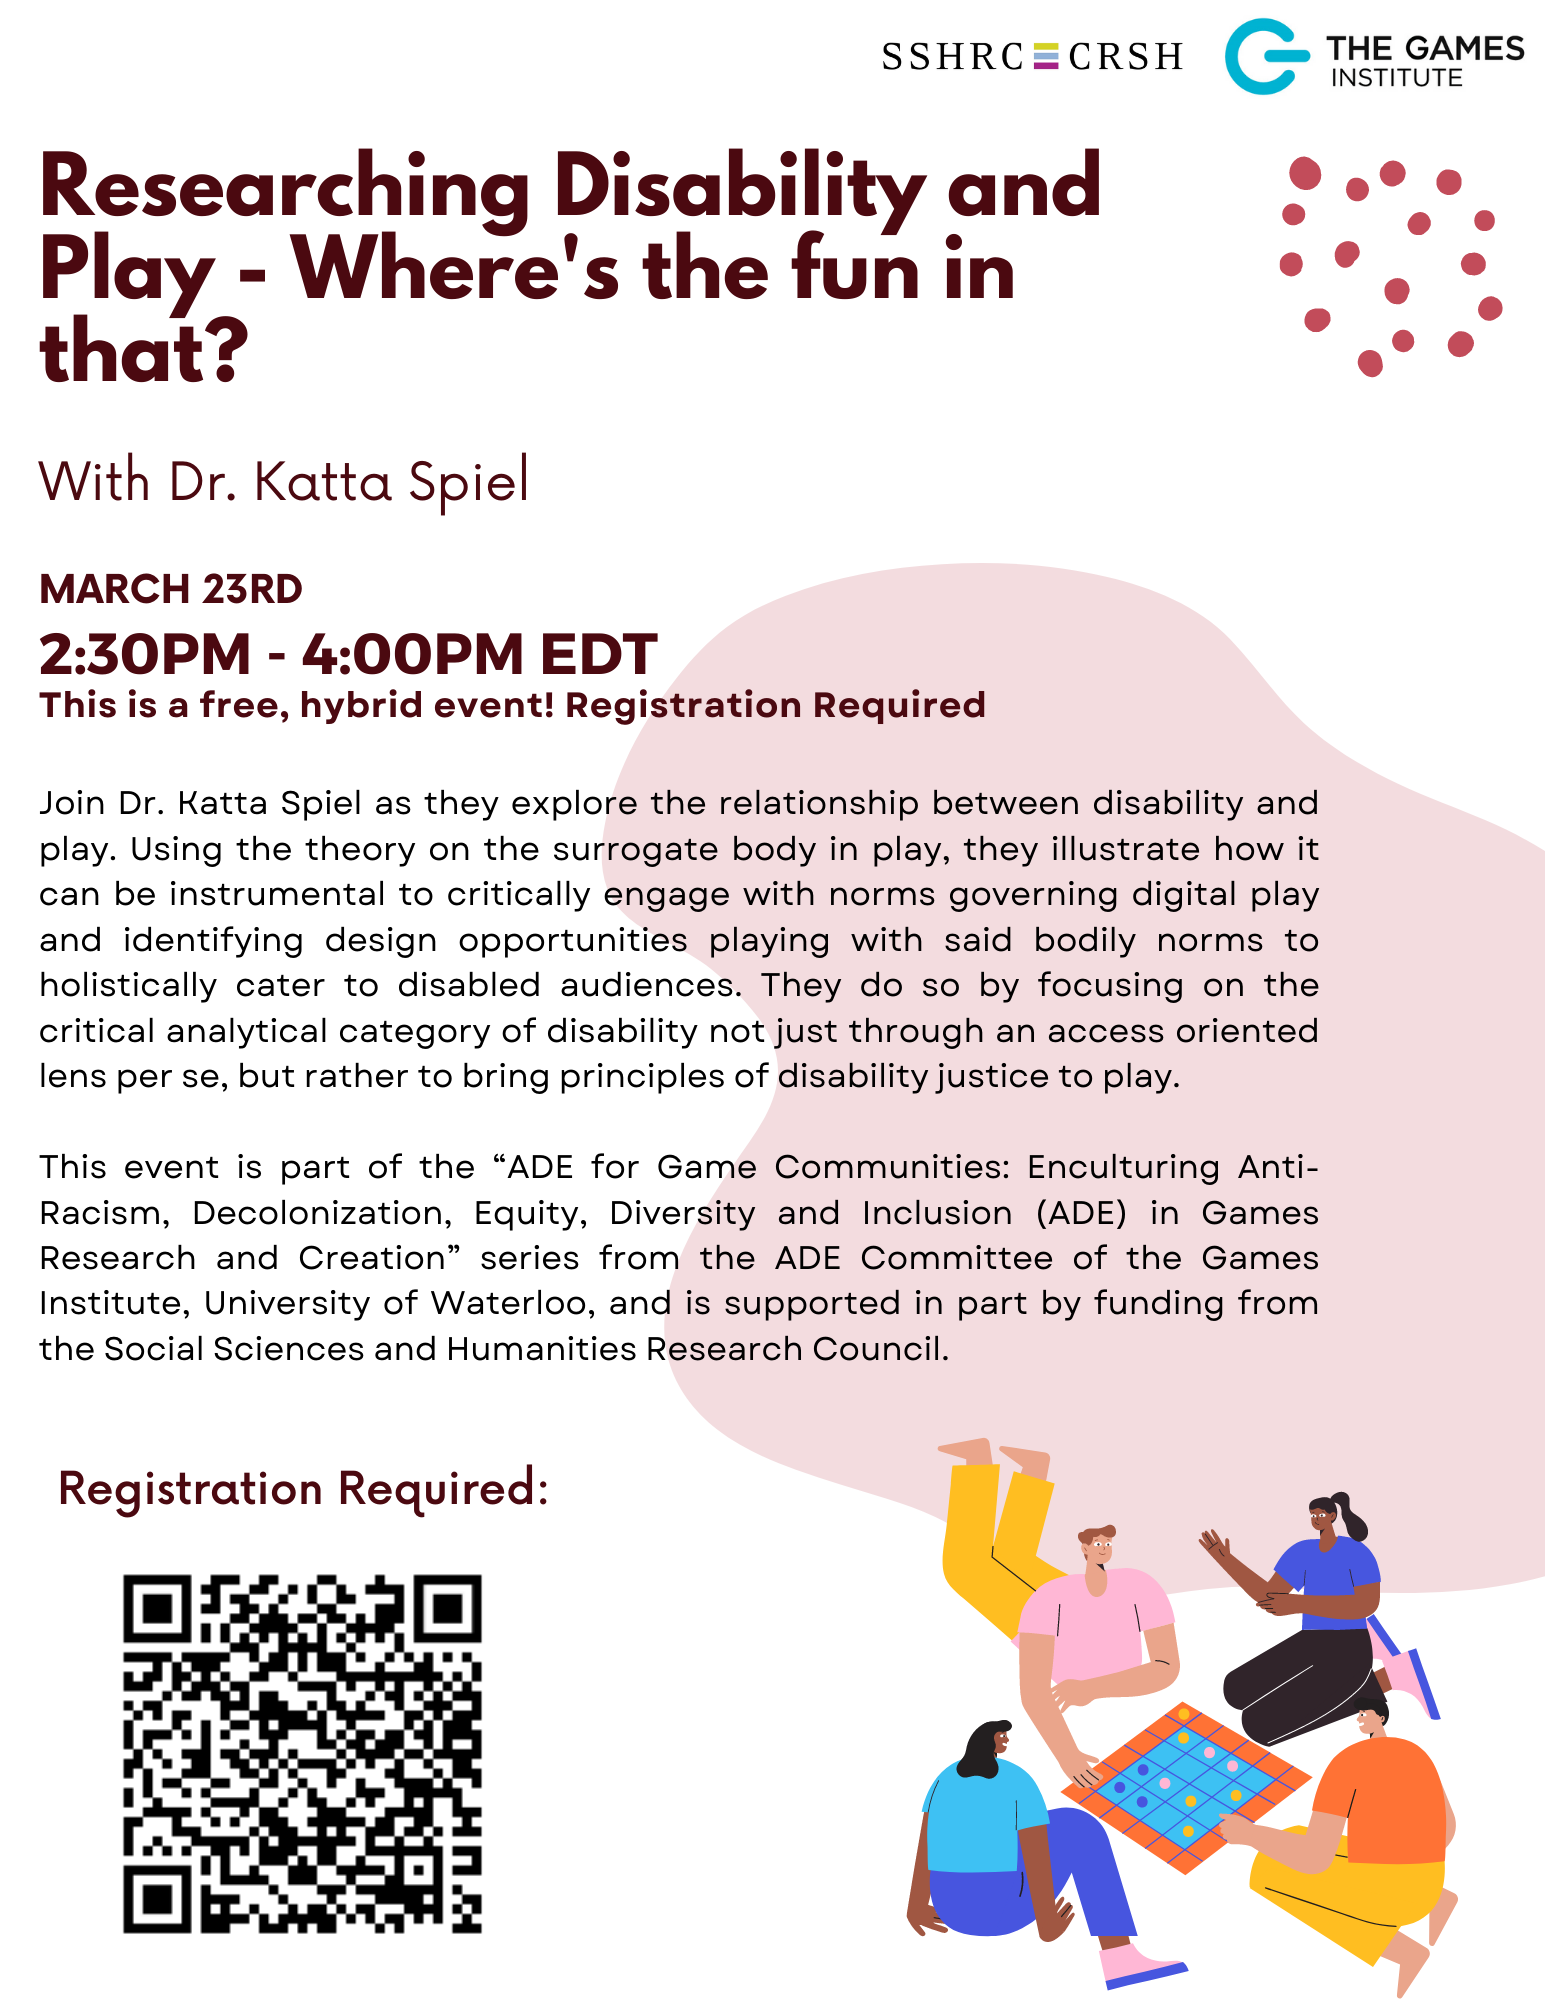 ADE Researching Disability and Play - Where's the fun in that? with Dr. Katta Spiel